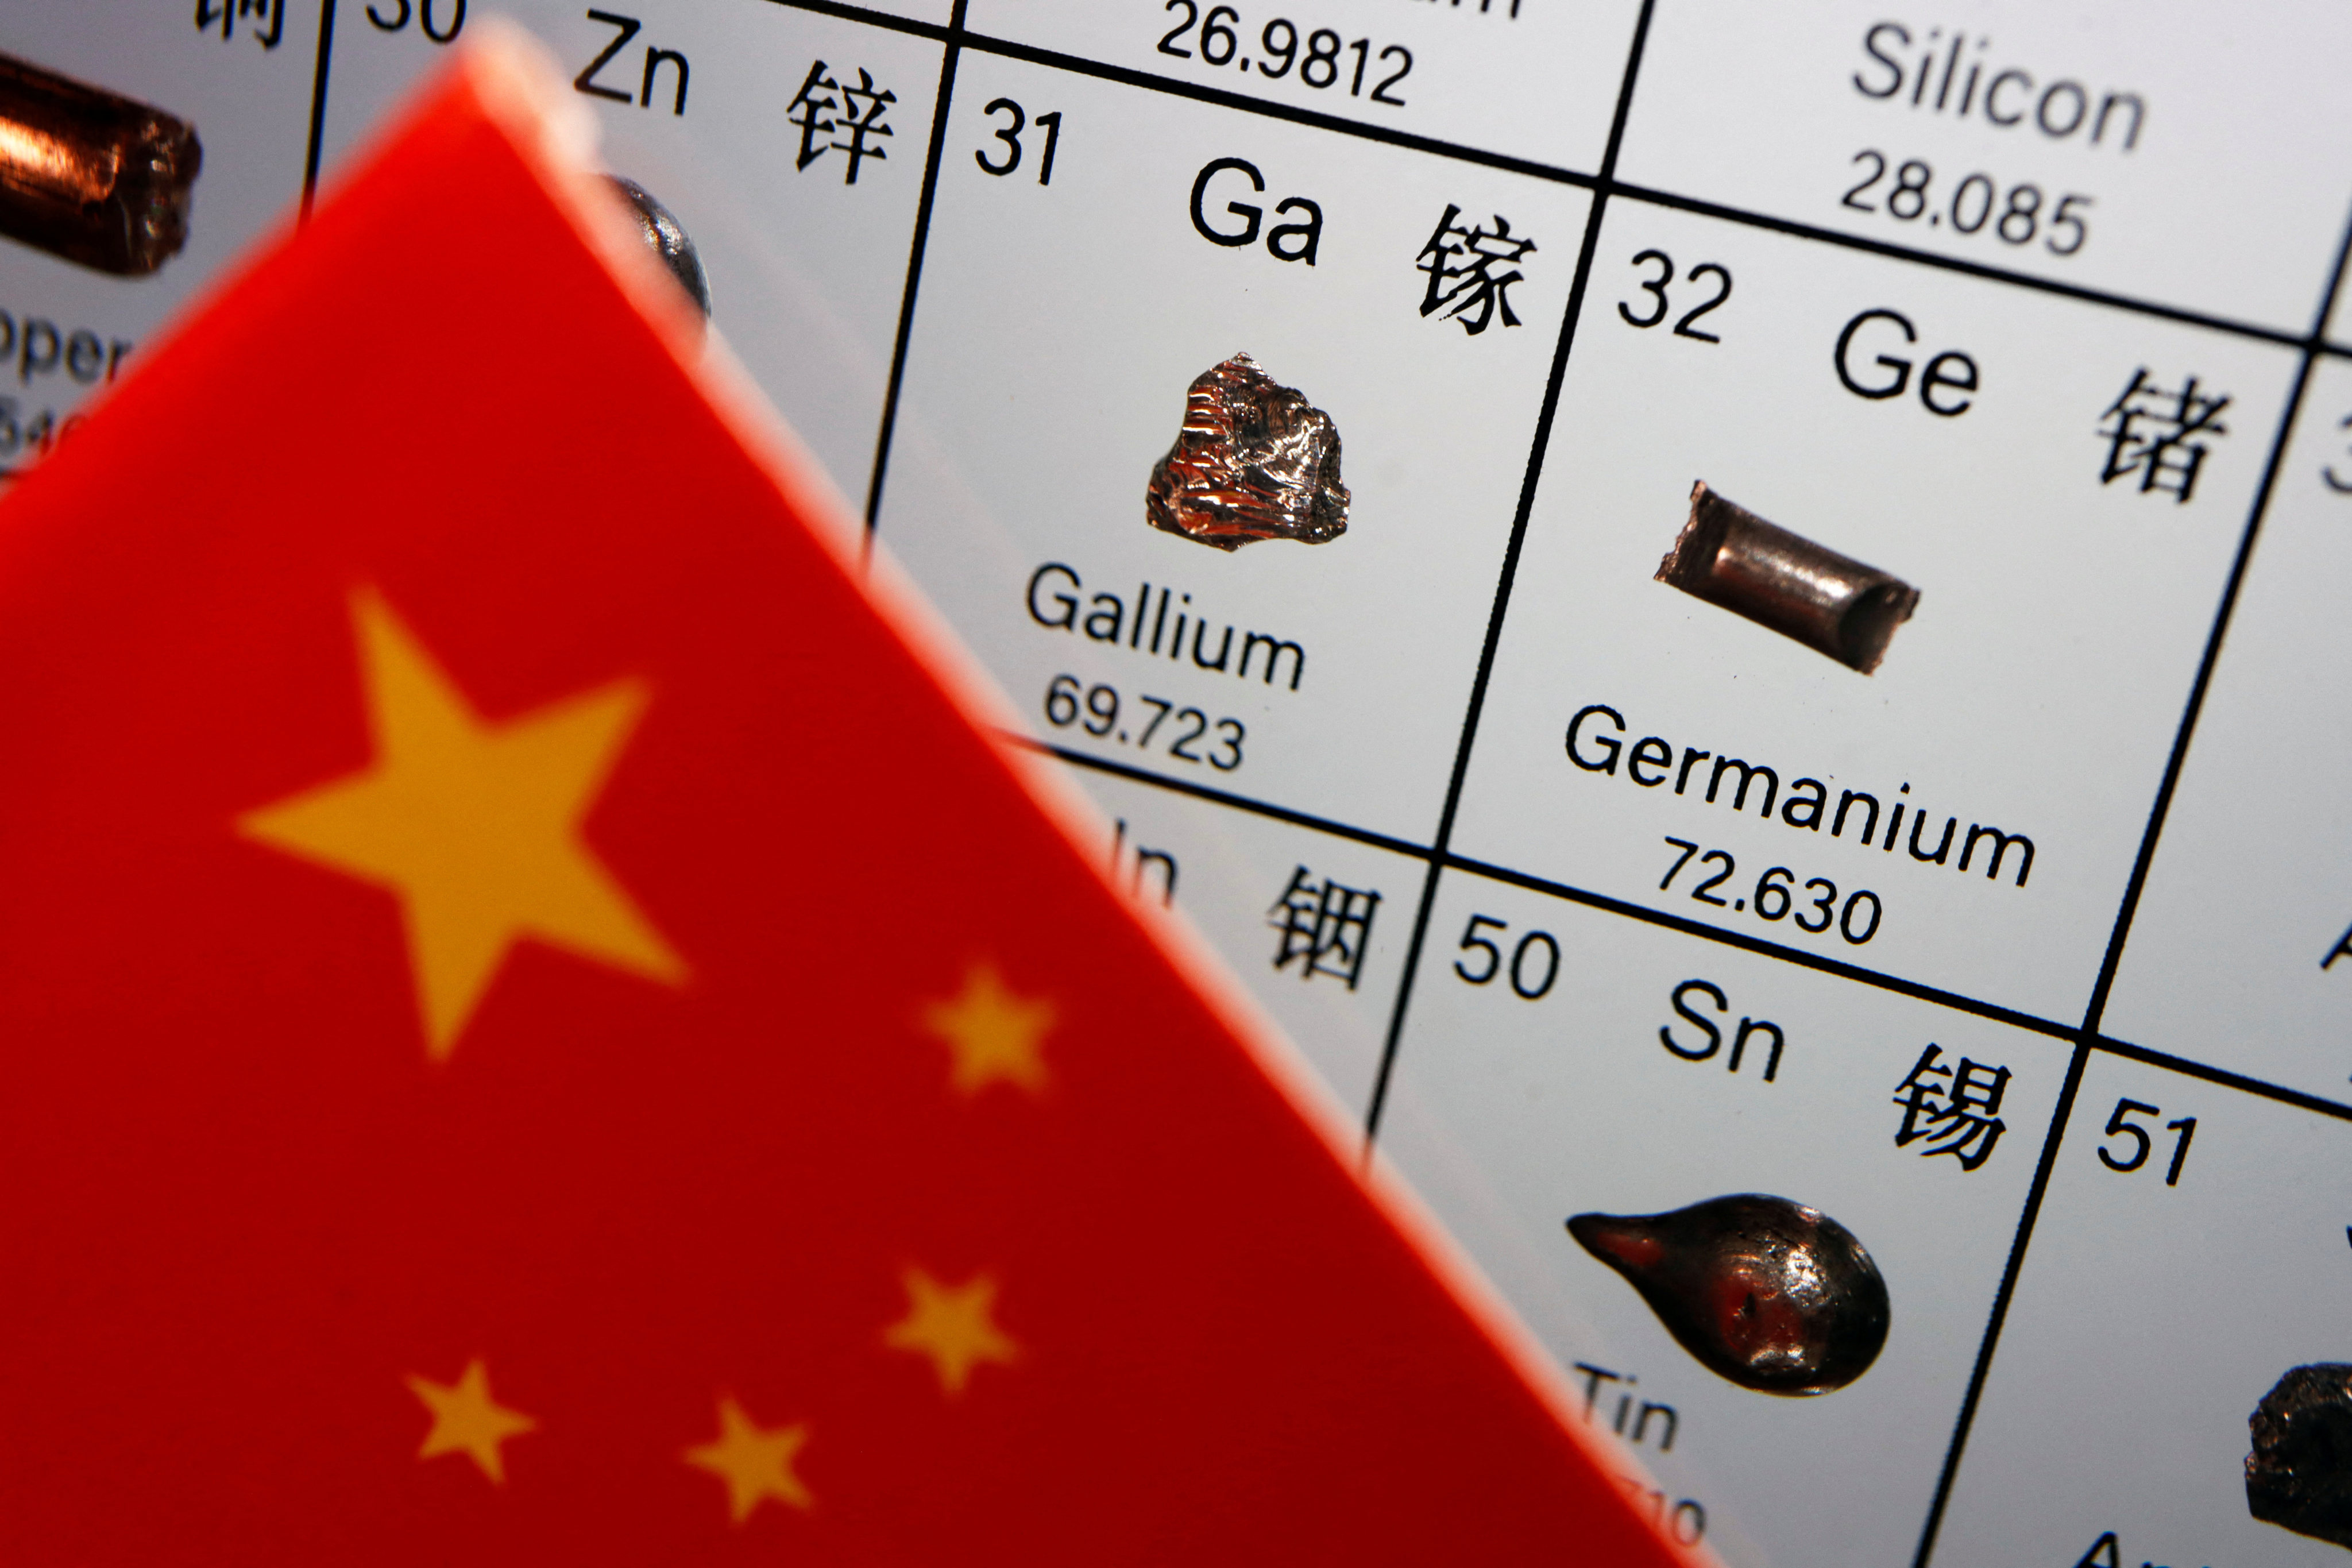 China recently imposed curbs on exports of gallium and germanium, two metals vital for hi-tech manufacturing. Photo: Reuters